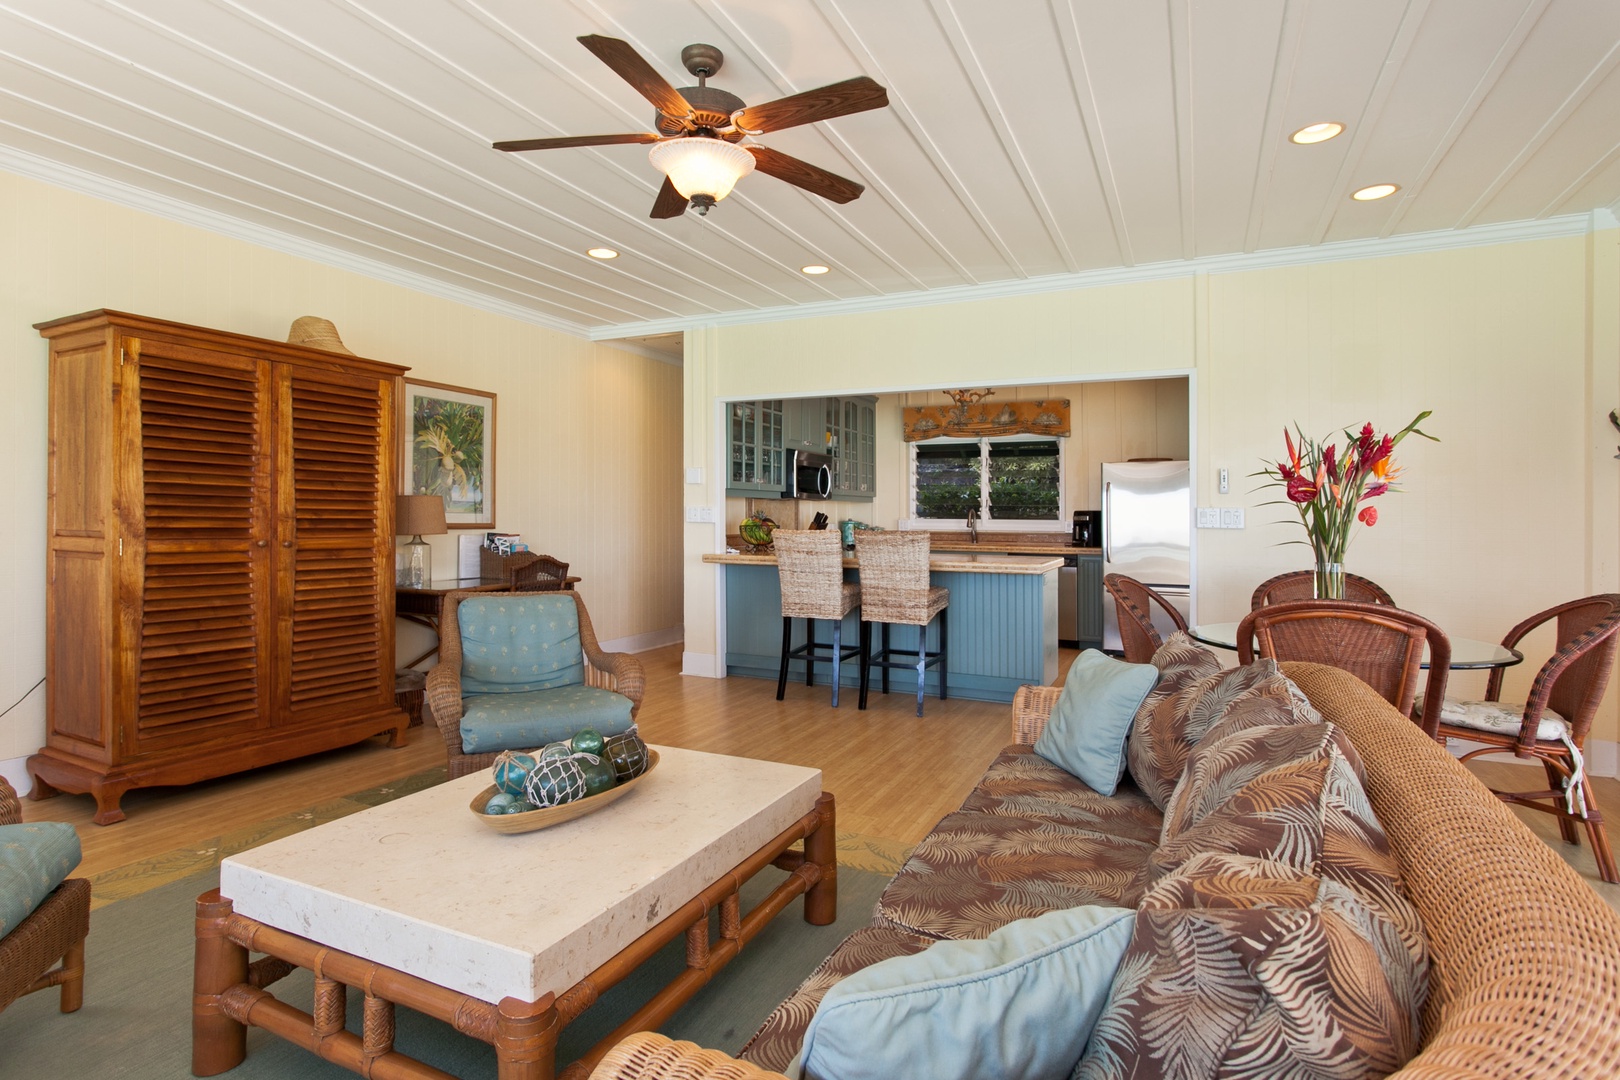 Kailua Vacation Rentals, Hale Kainalu* - Looking towards the kitchen from the living room.